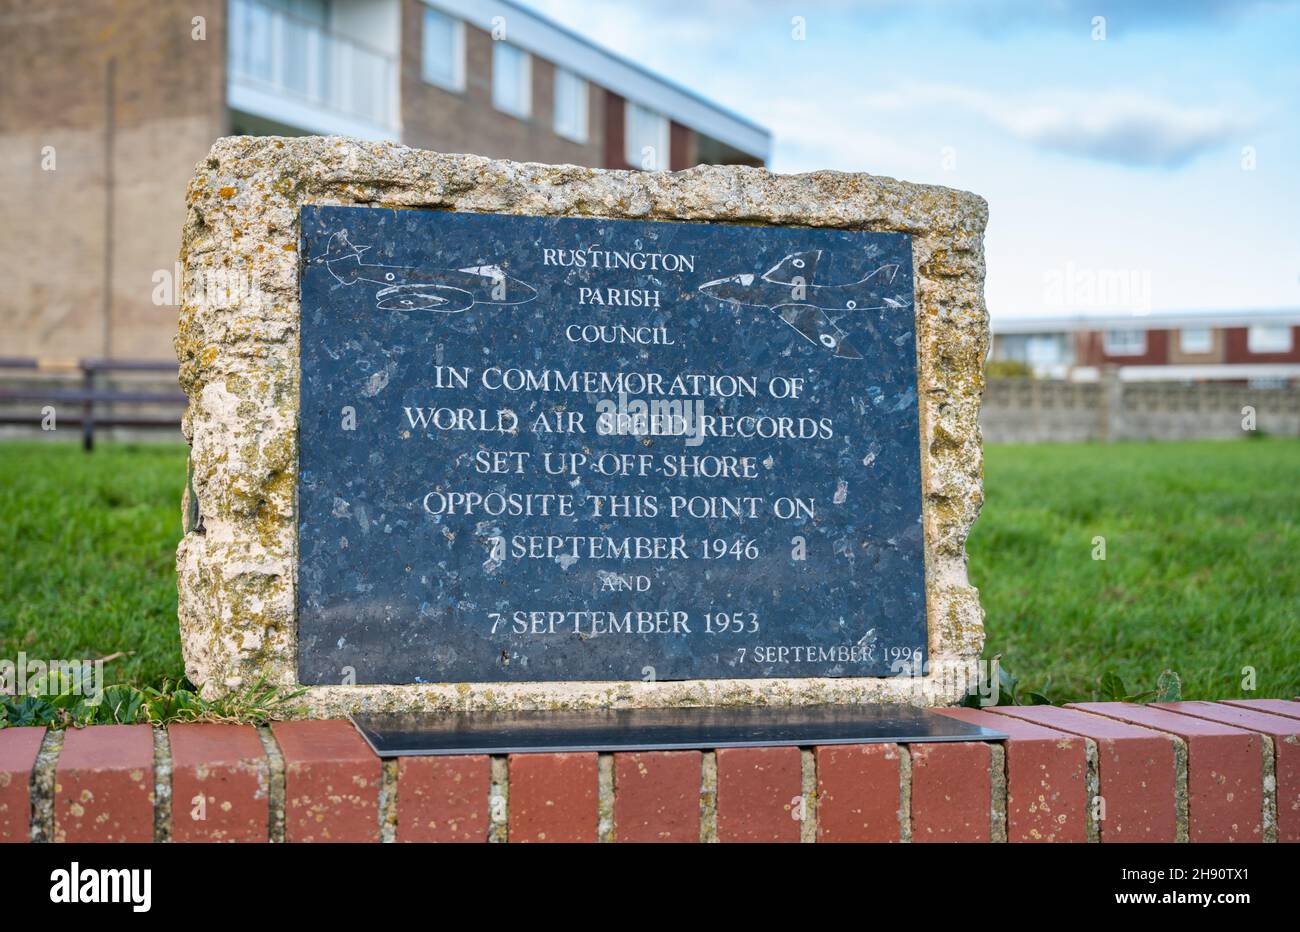 Commemorating plaque from 1996 in commemoration of 2 world air speed records in 1946 & 1953 by the seafront in Rustington, West Sussex, England, UK. Stock Photo